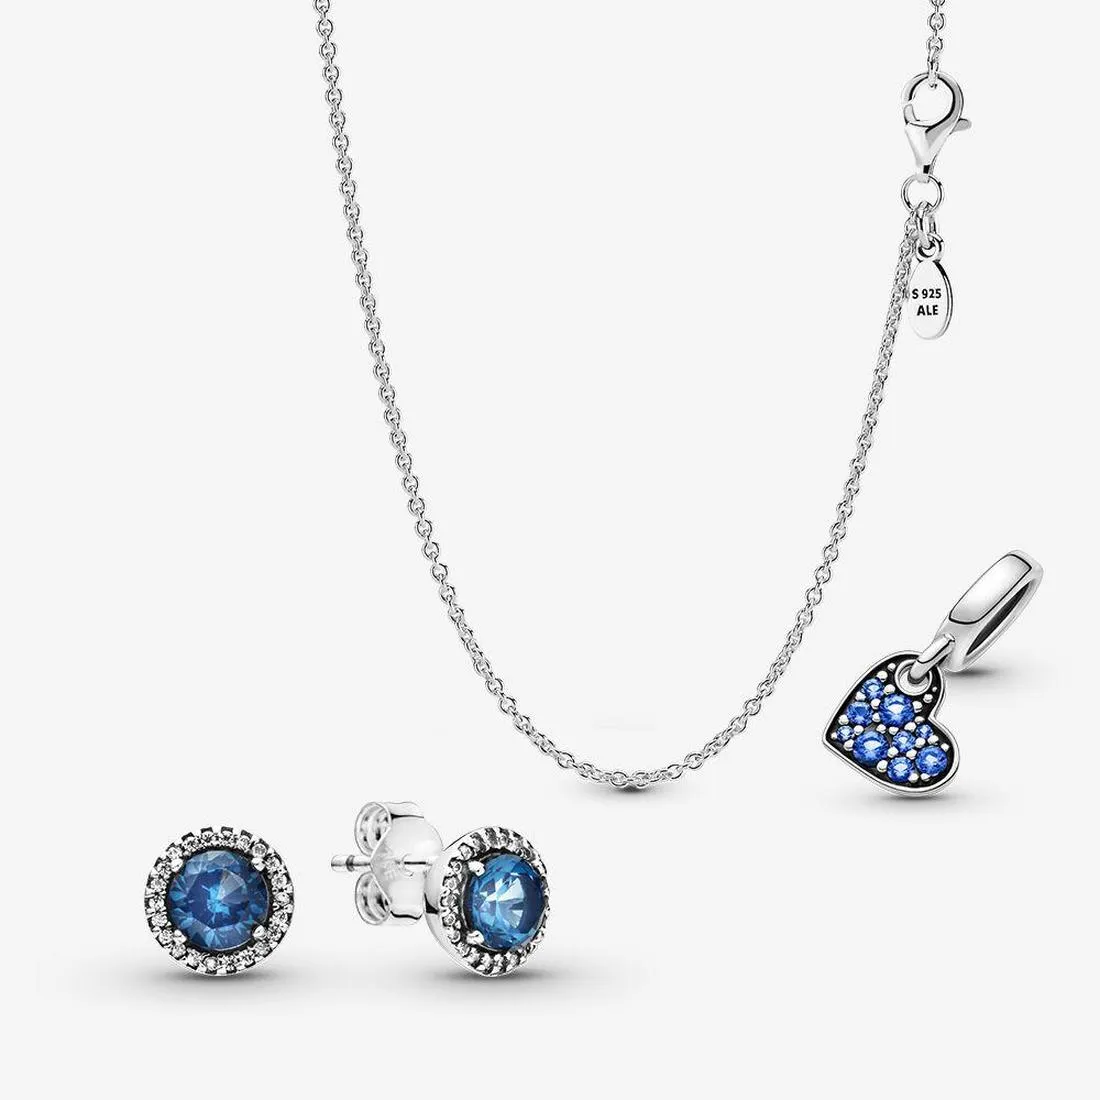 Freehand Heart Necklace and Earring Set – Shop Pandora Jewelry